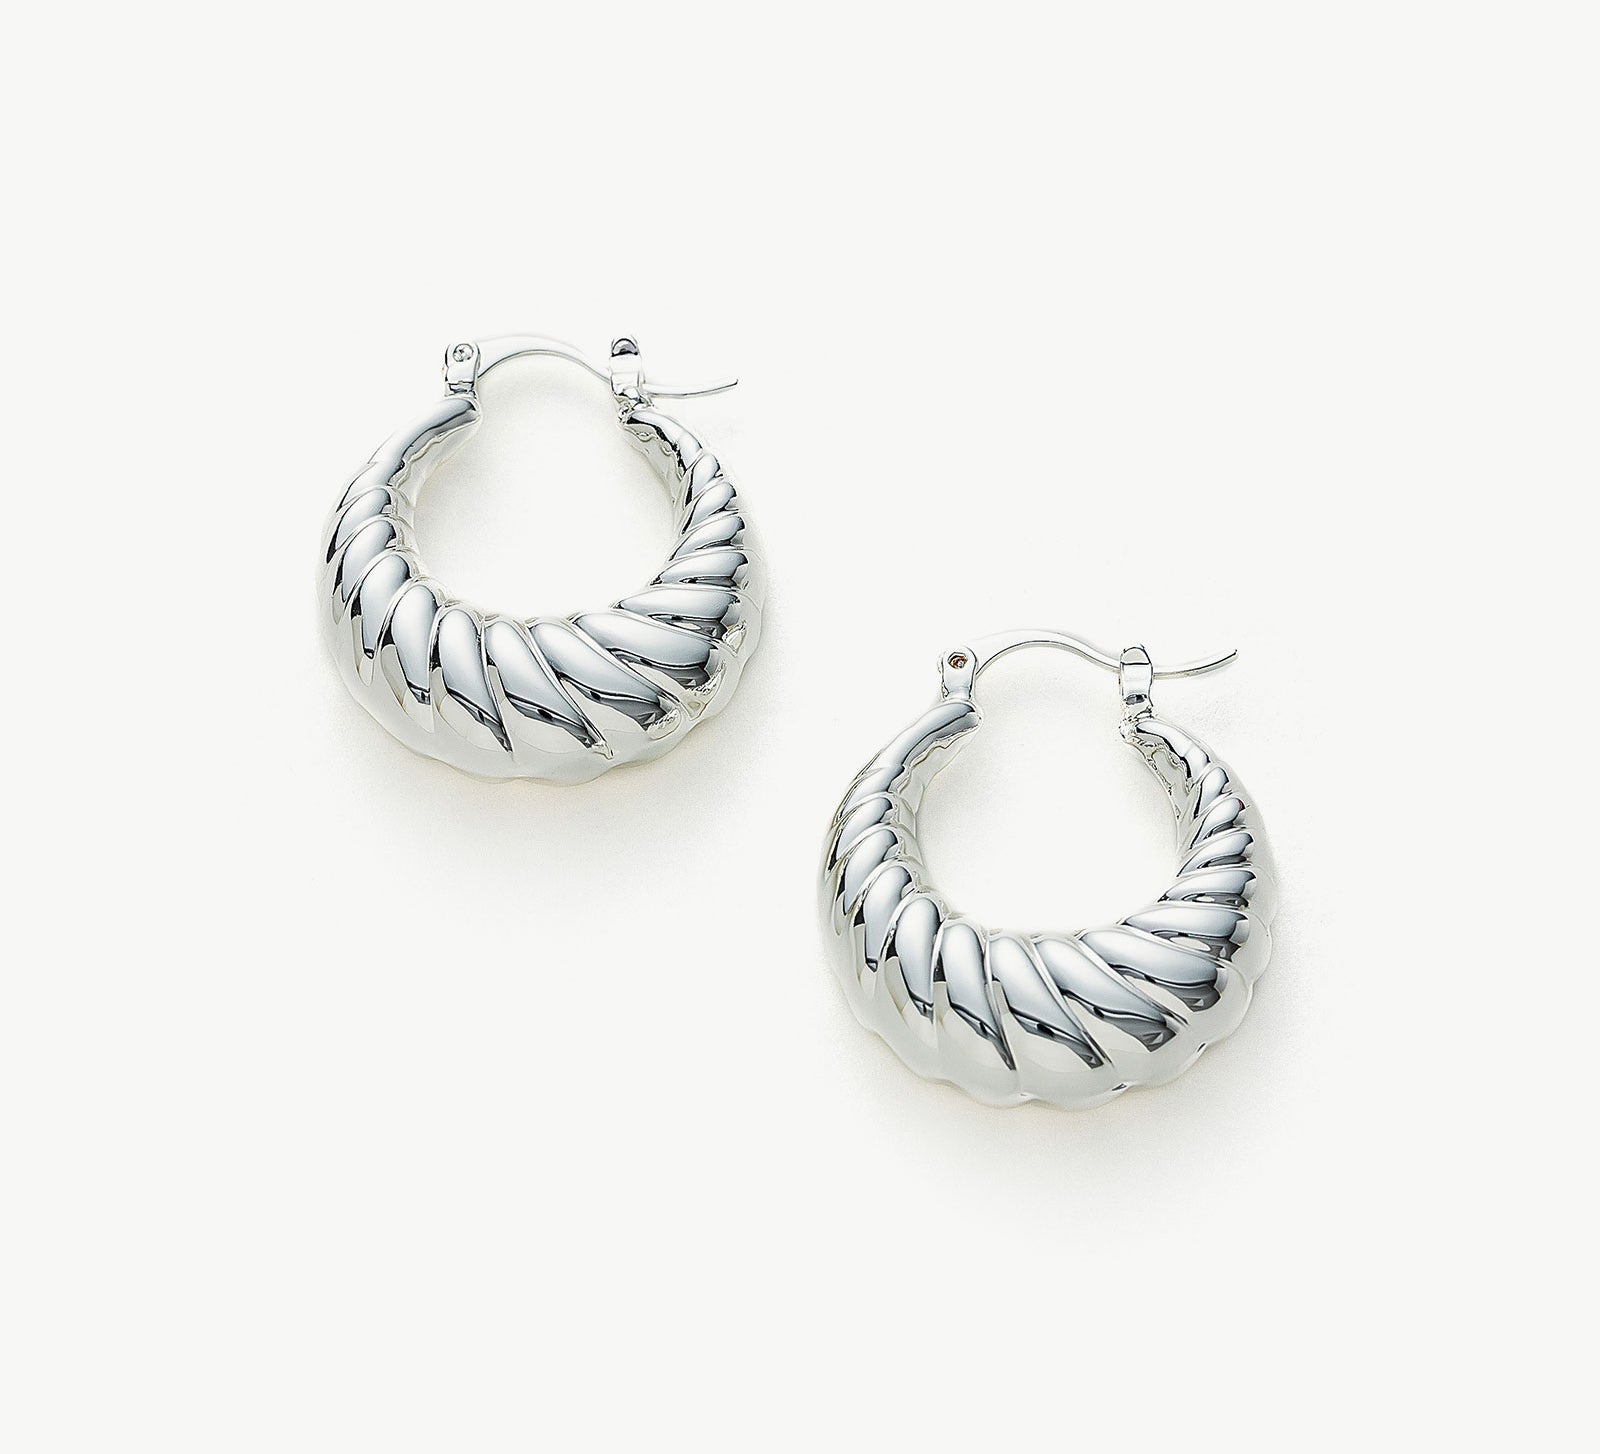 Dome Ridge Hoop Earrings, featuring a stylish dome ridge design, these earrings add a touch of elegance and modern flair to your ear ensemble